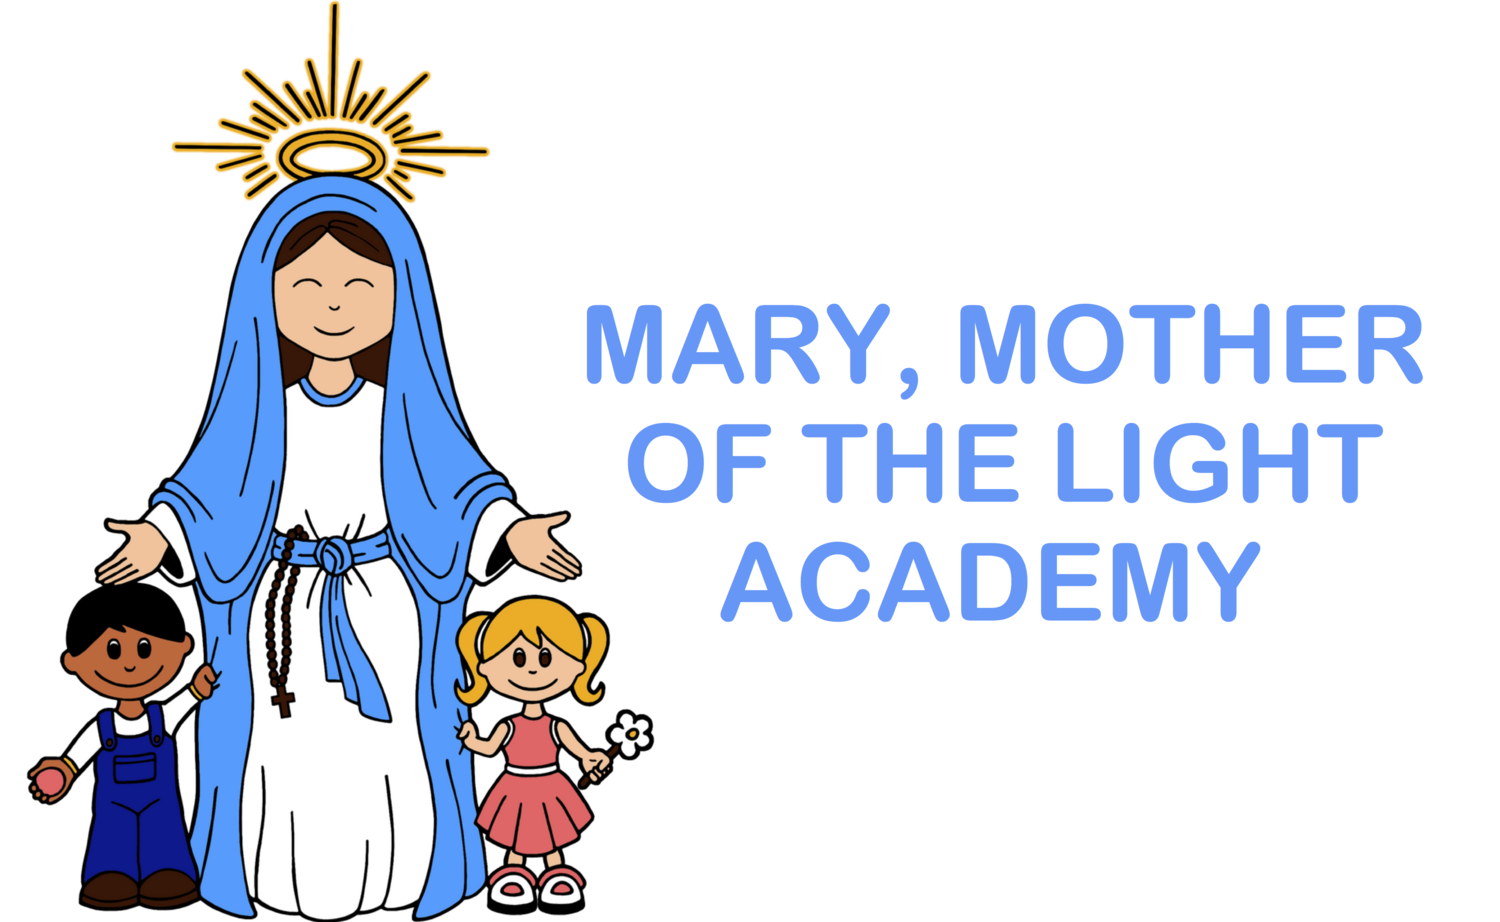 Mary, Mother of the Light Academy